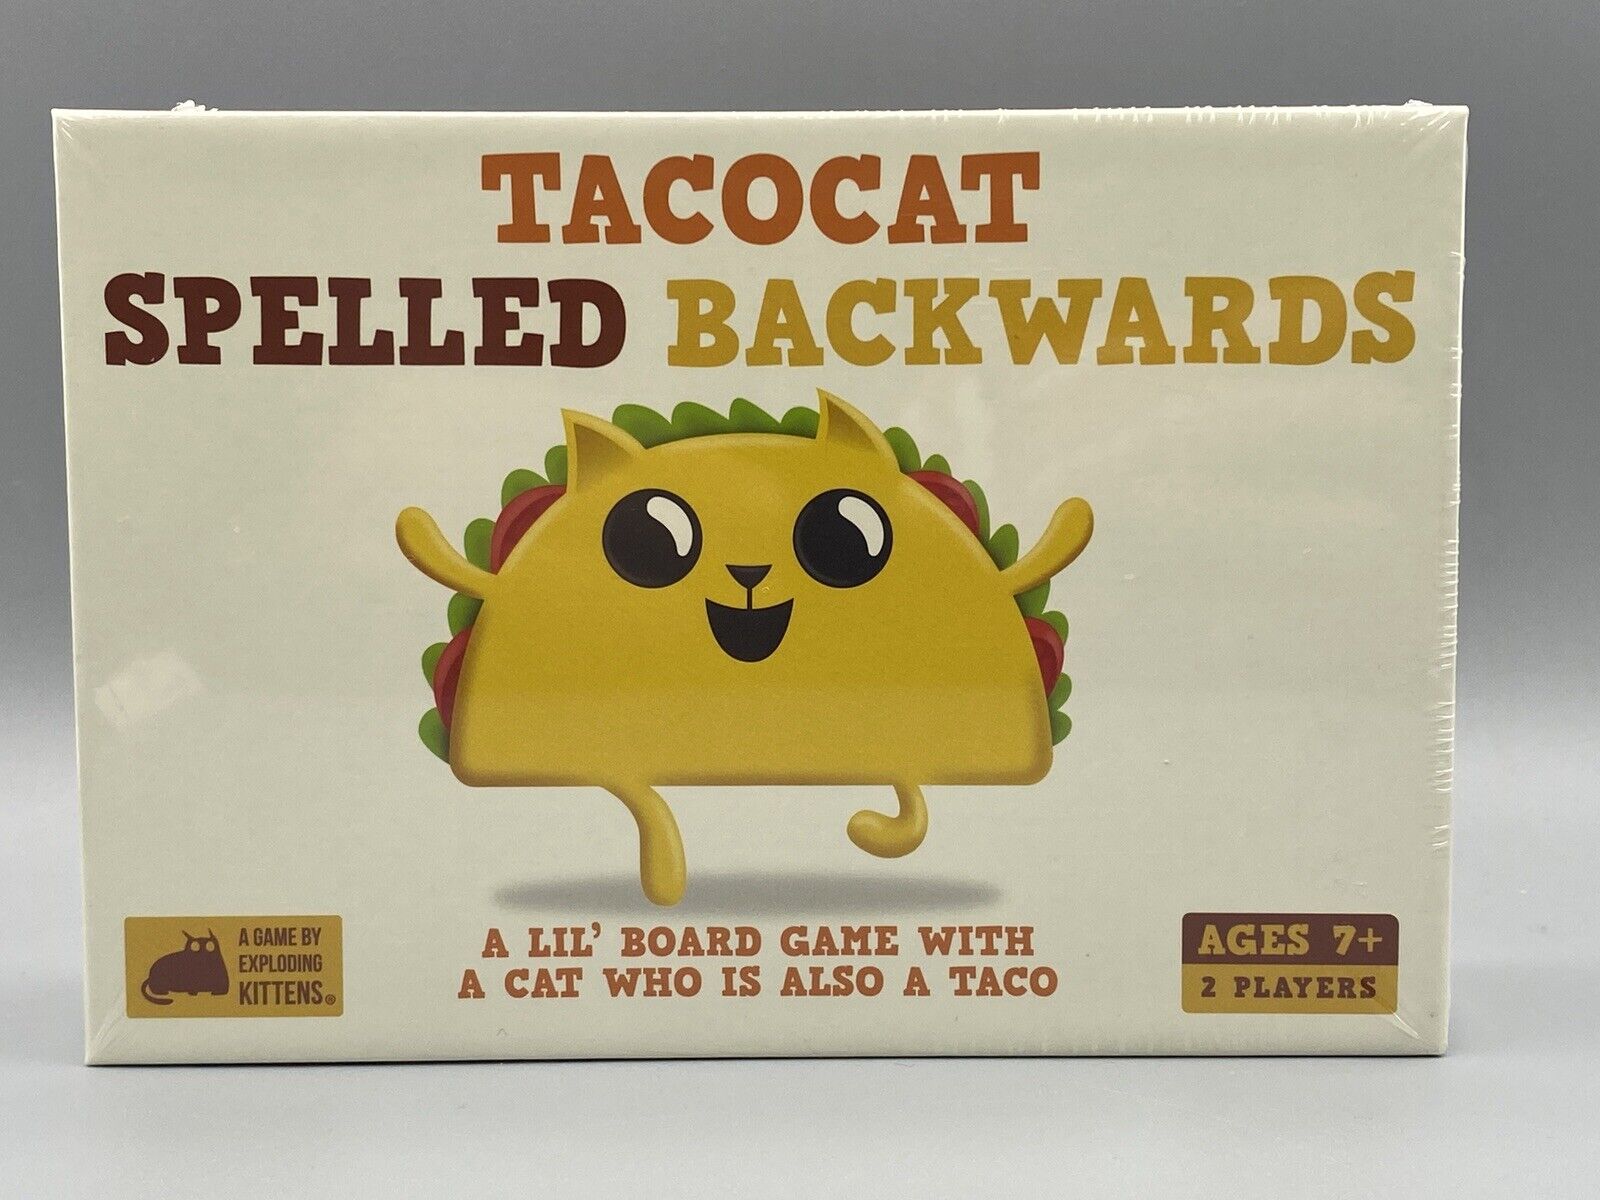 TACOCAT SPELLED BACKWARDS FAMILY CARD GAME 2 Players Ages 7+